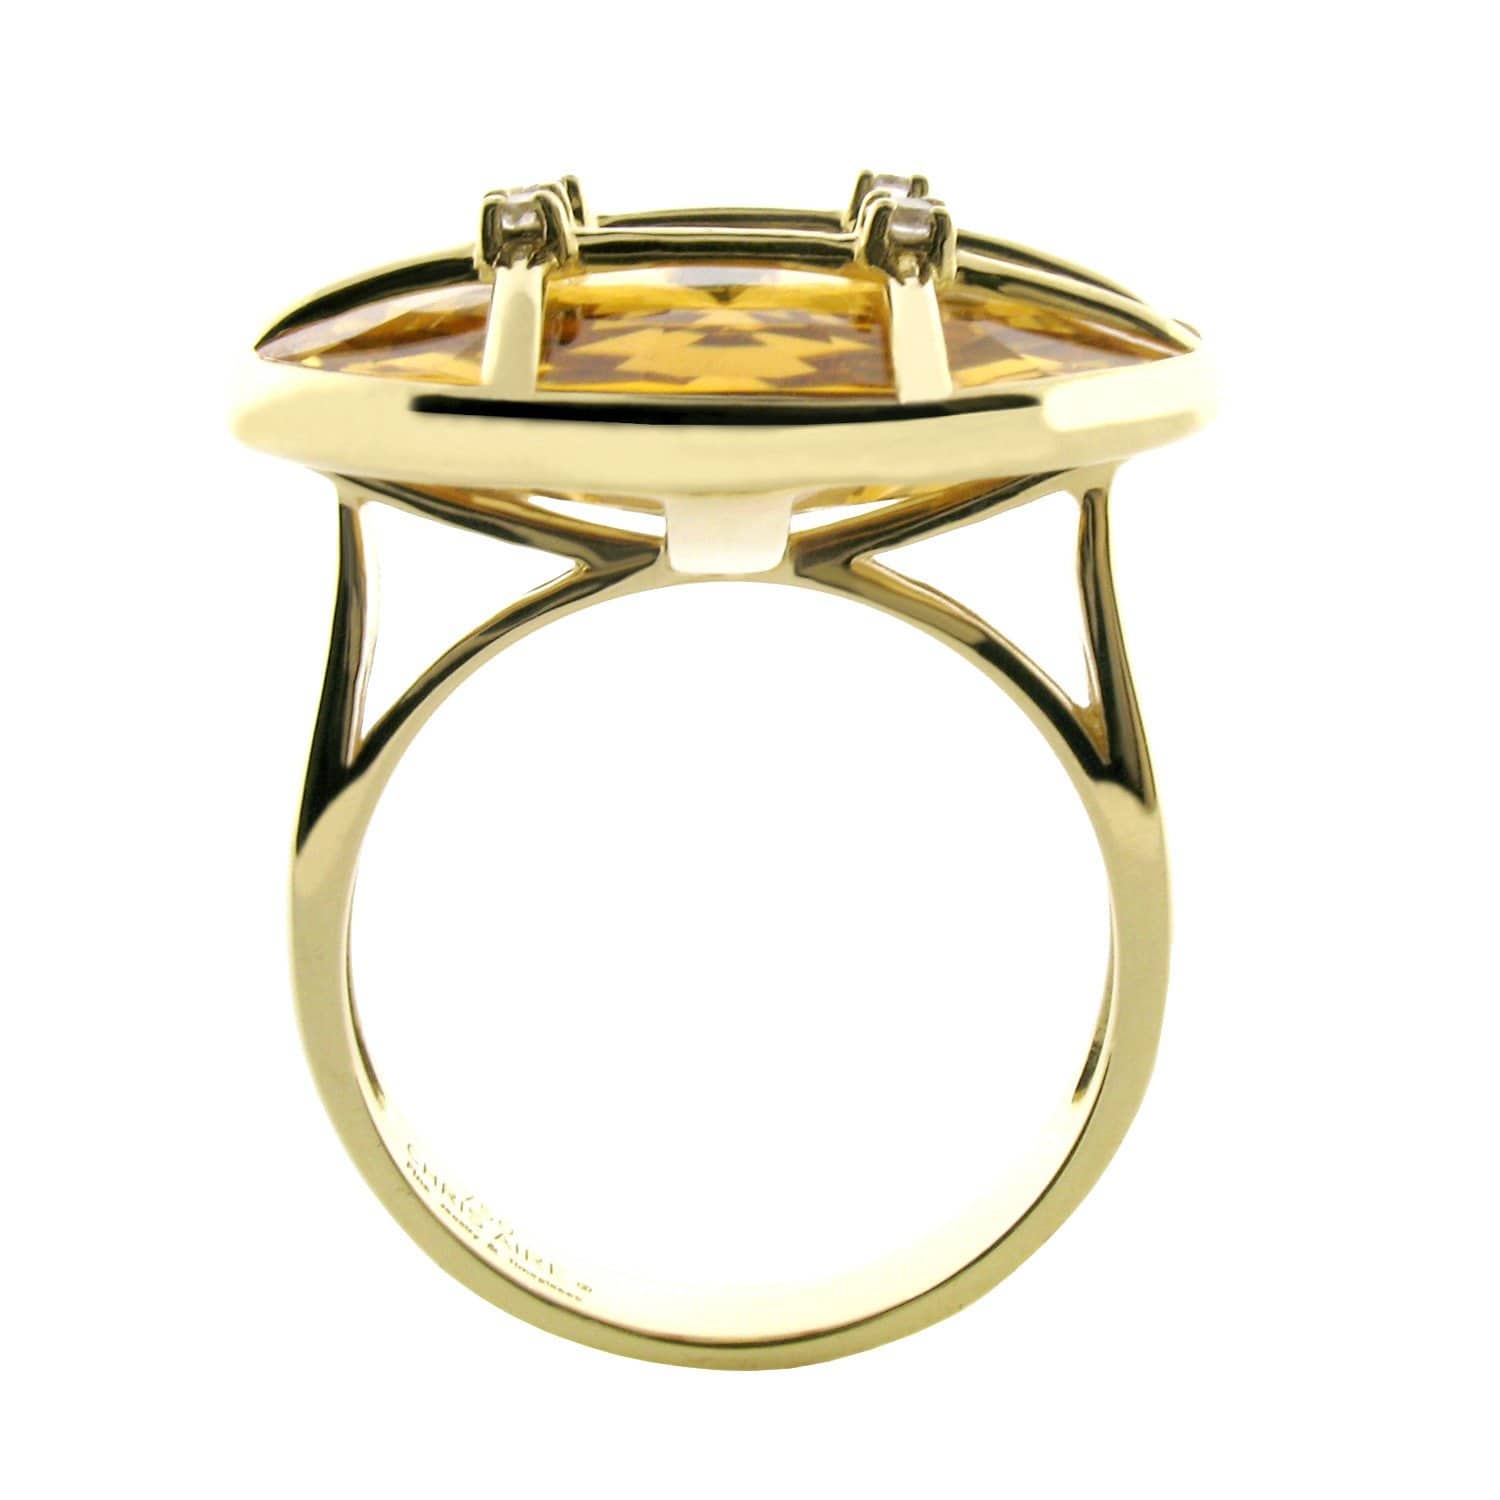 CHRIS AIRE CITRINE RING-GRID - Chris Aire Fine Jewelry & Timepieces